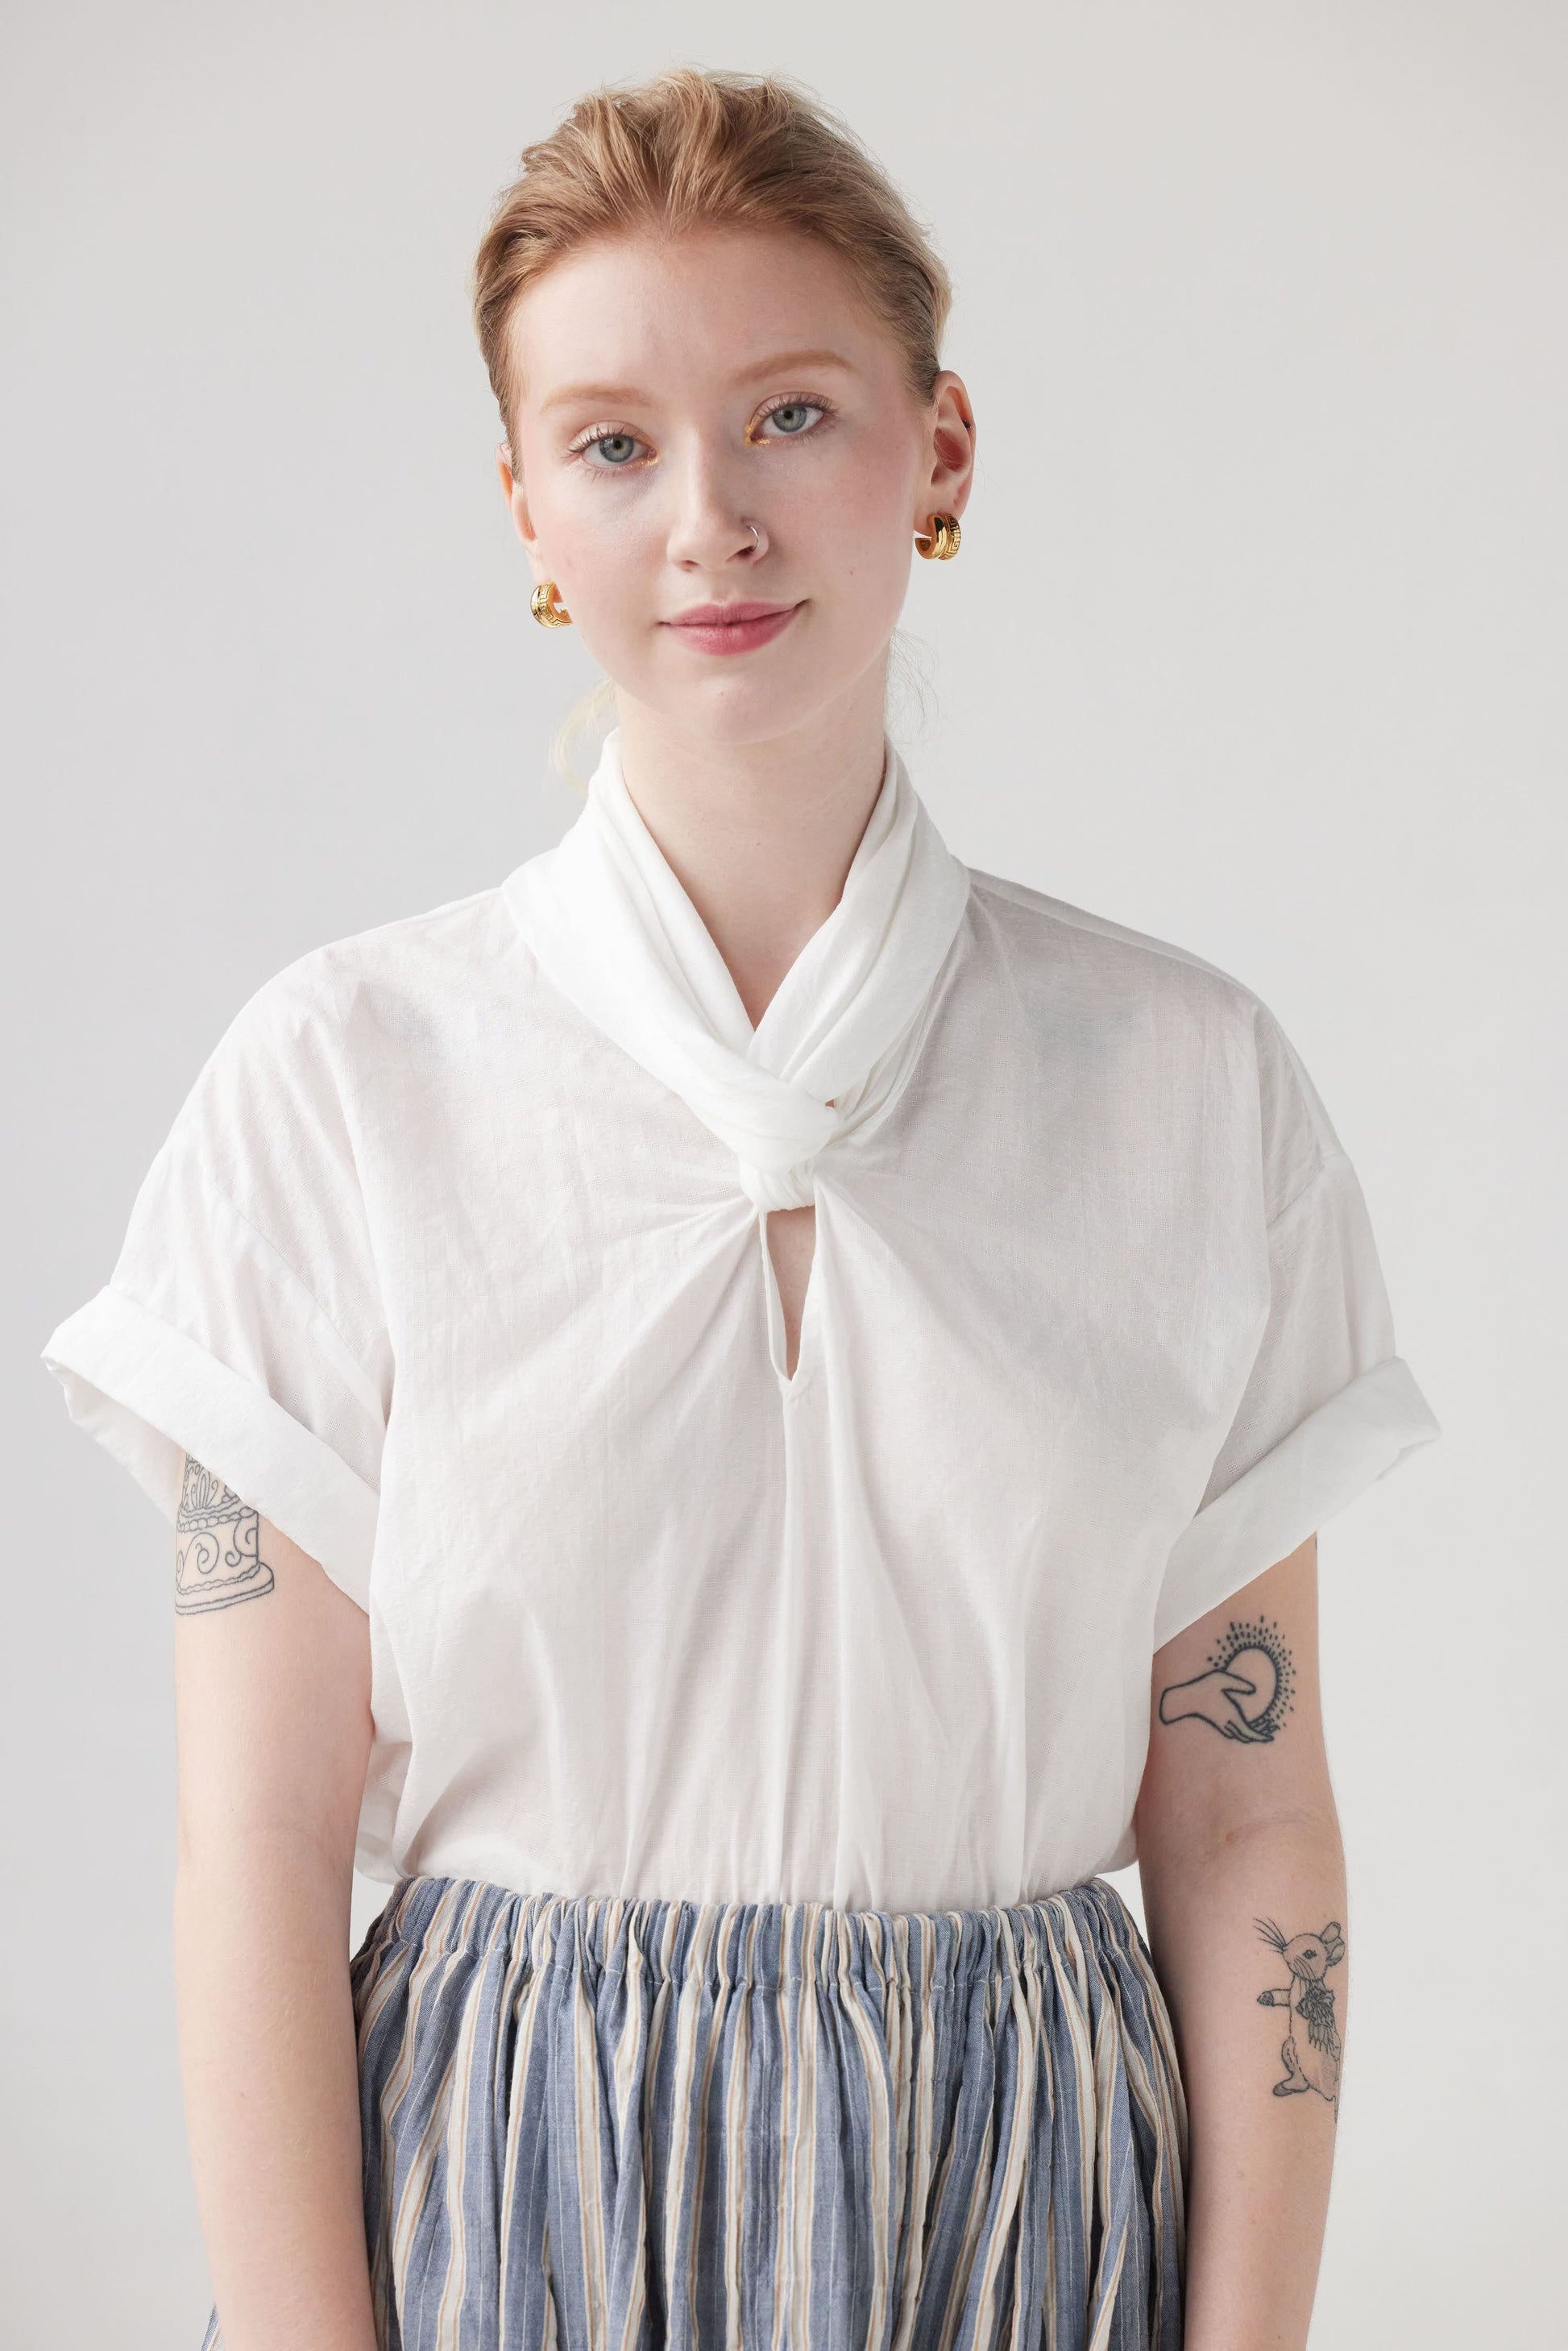 Betty Blouse in Ticked Cotton Tops CHRISTINE ALCALAY   